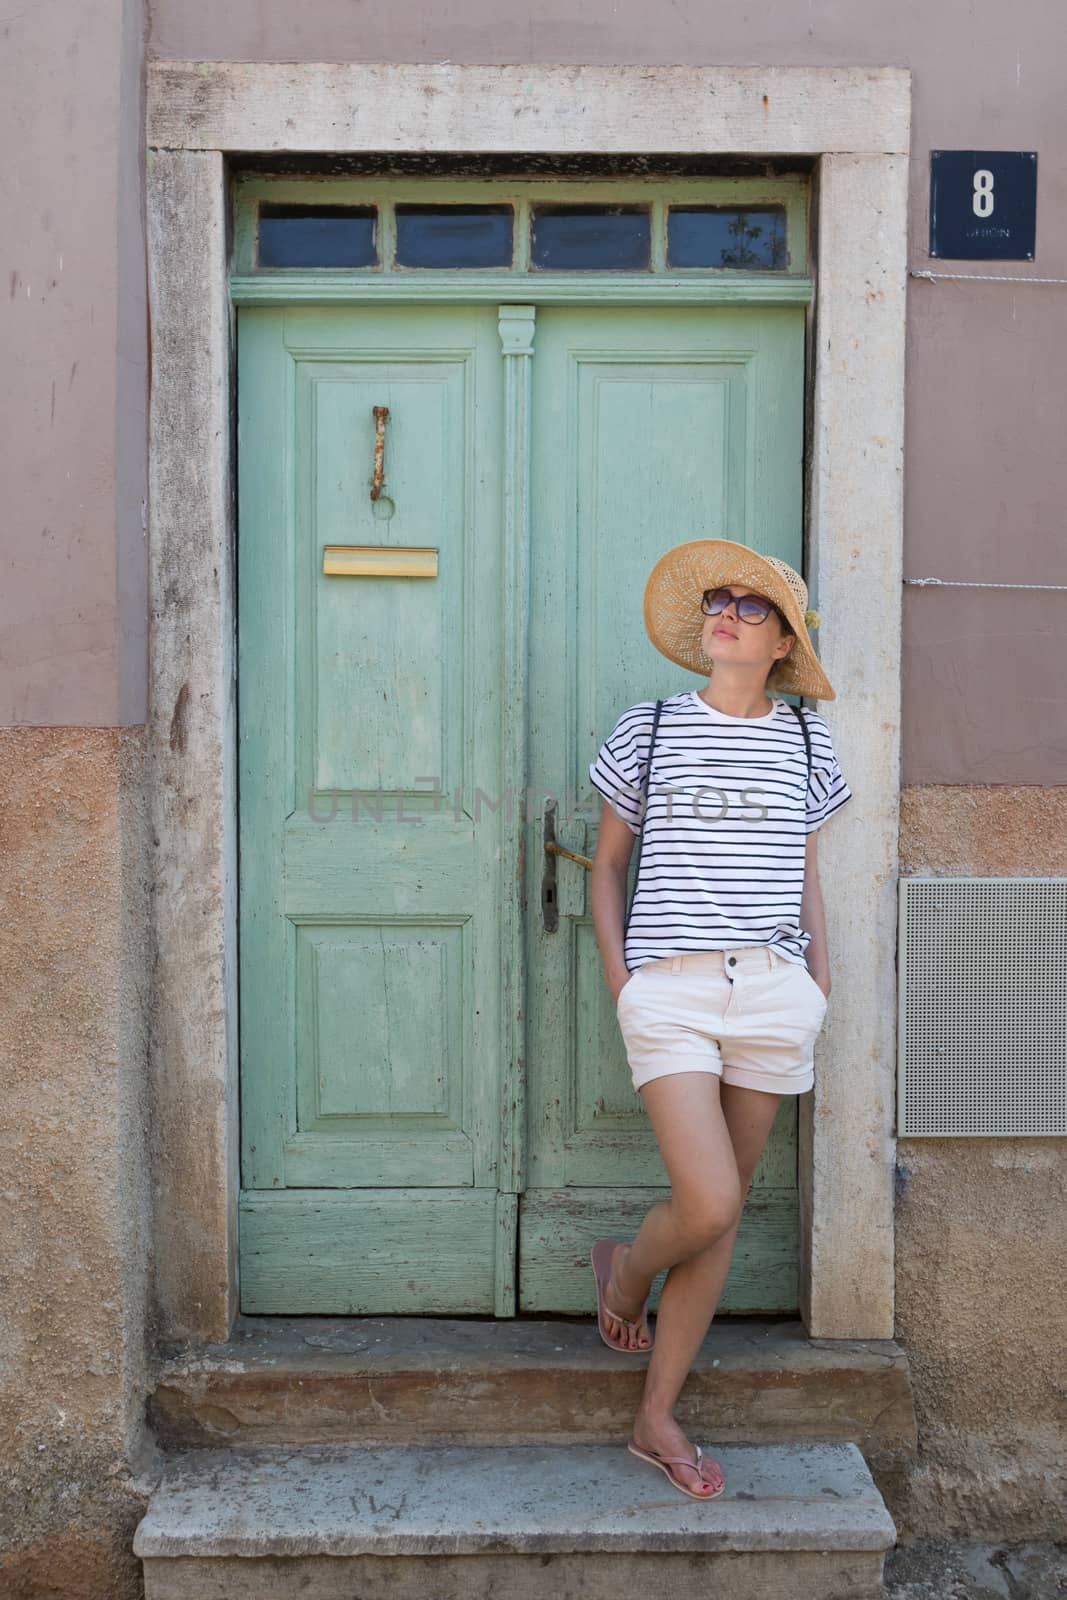 Beautiful young female tourist woman wearing sun hat, standing and relaxing in shade in front of vinatage wooden door in old Mediterranean town while sightseeing on hot summer day.